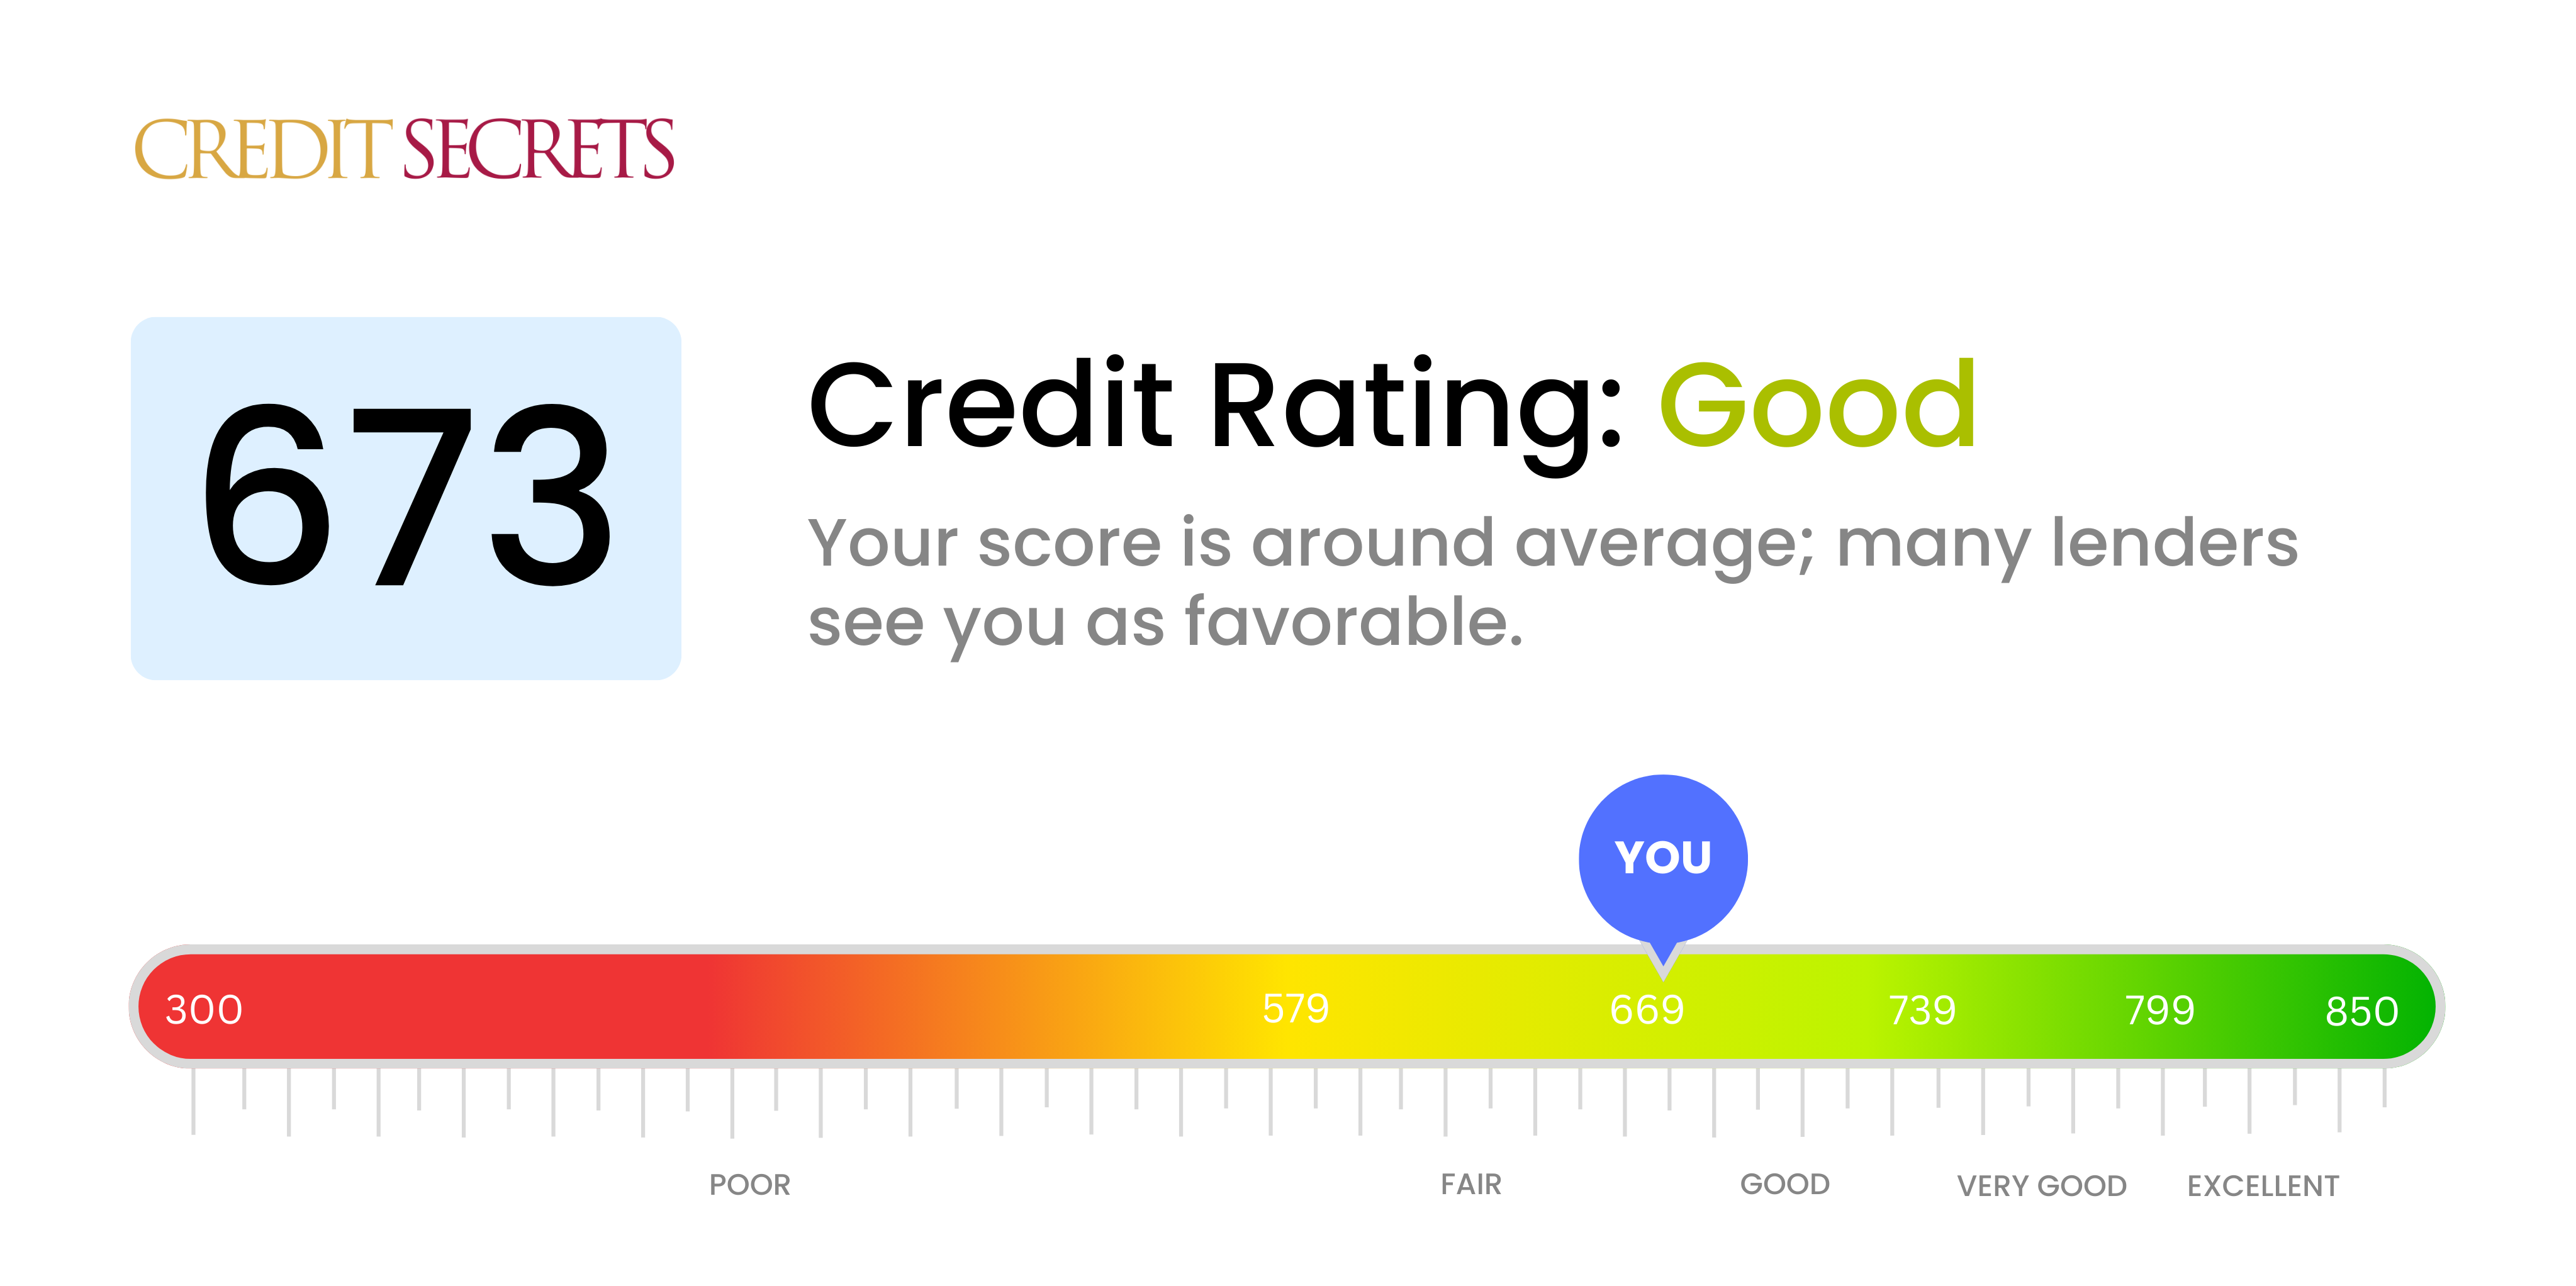 Is 673 a good credit score?